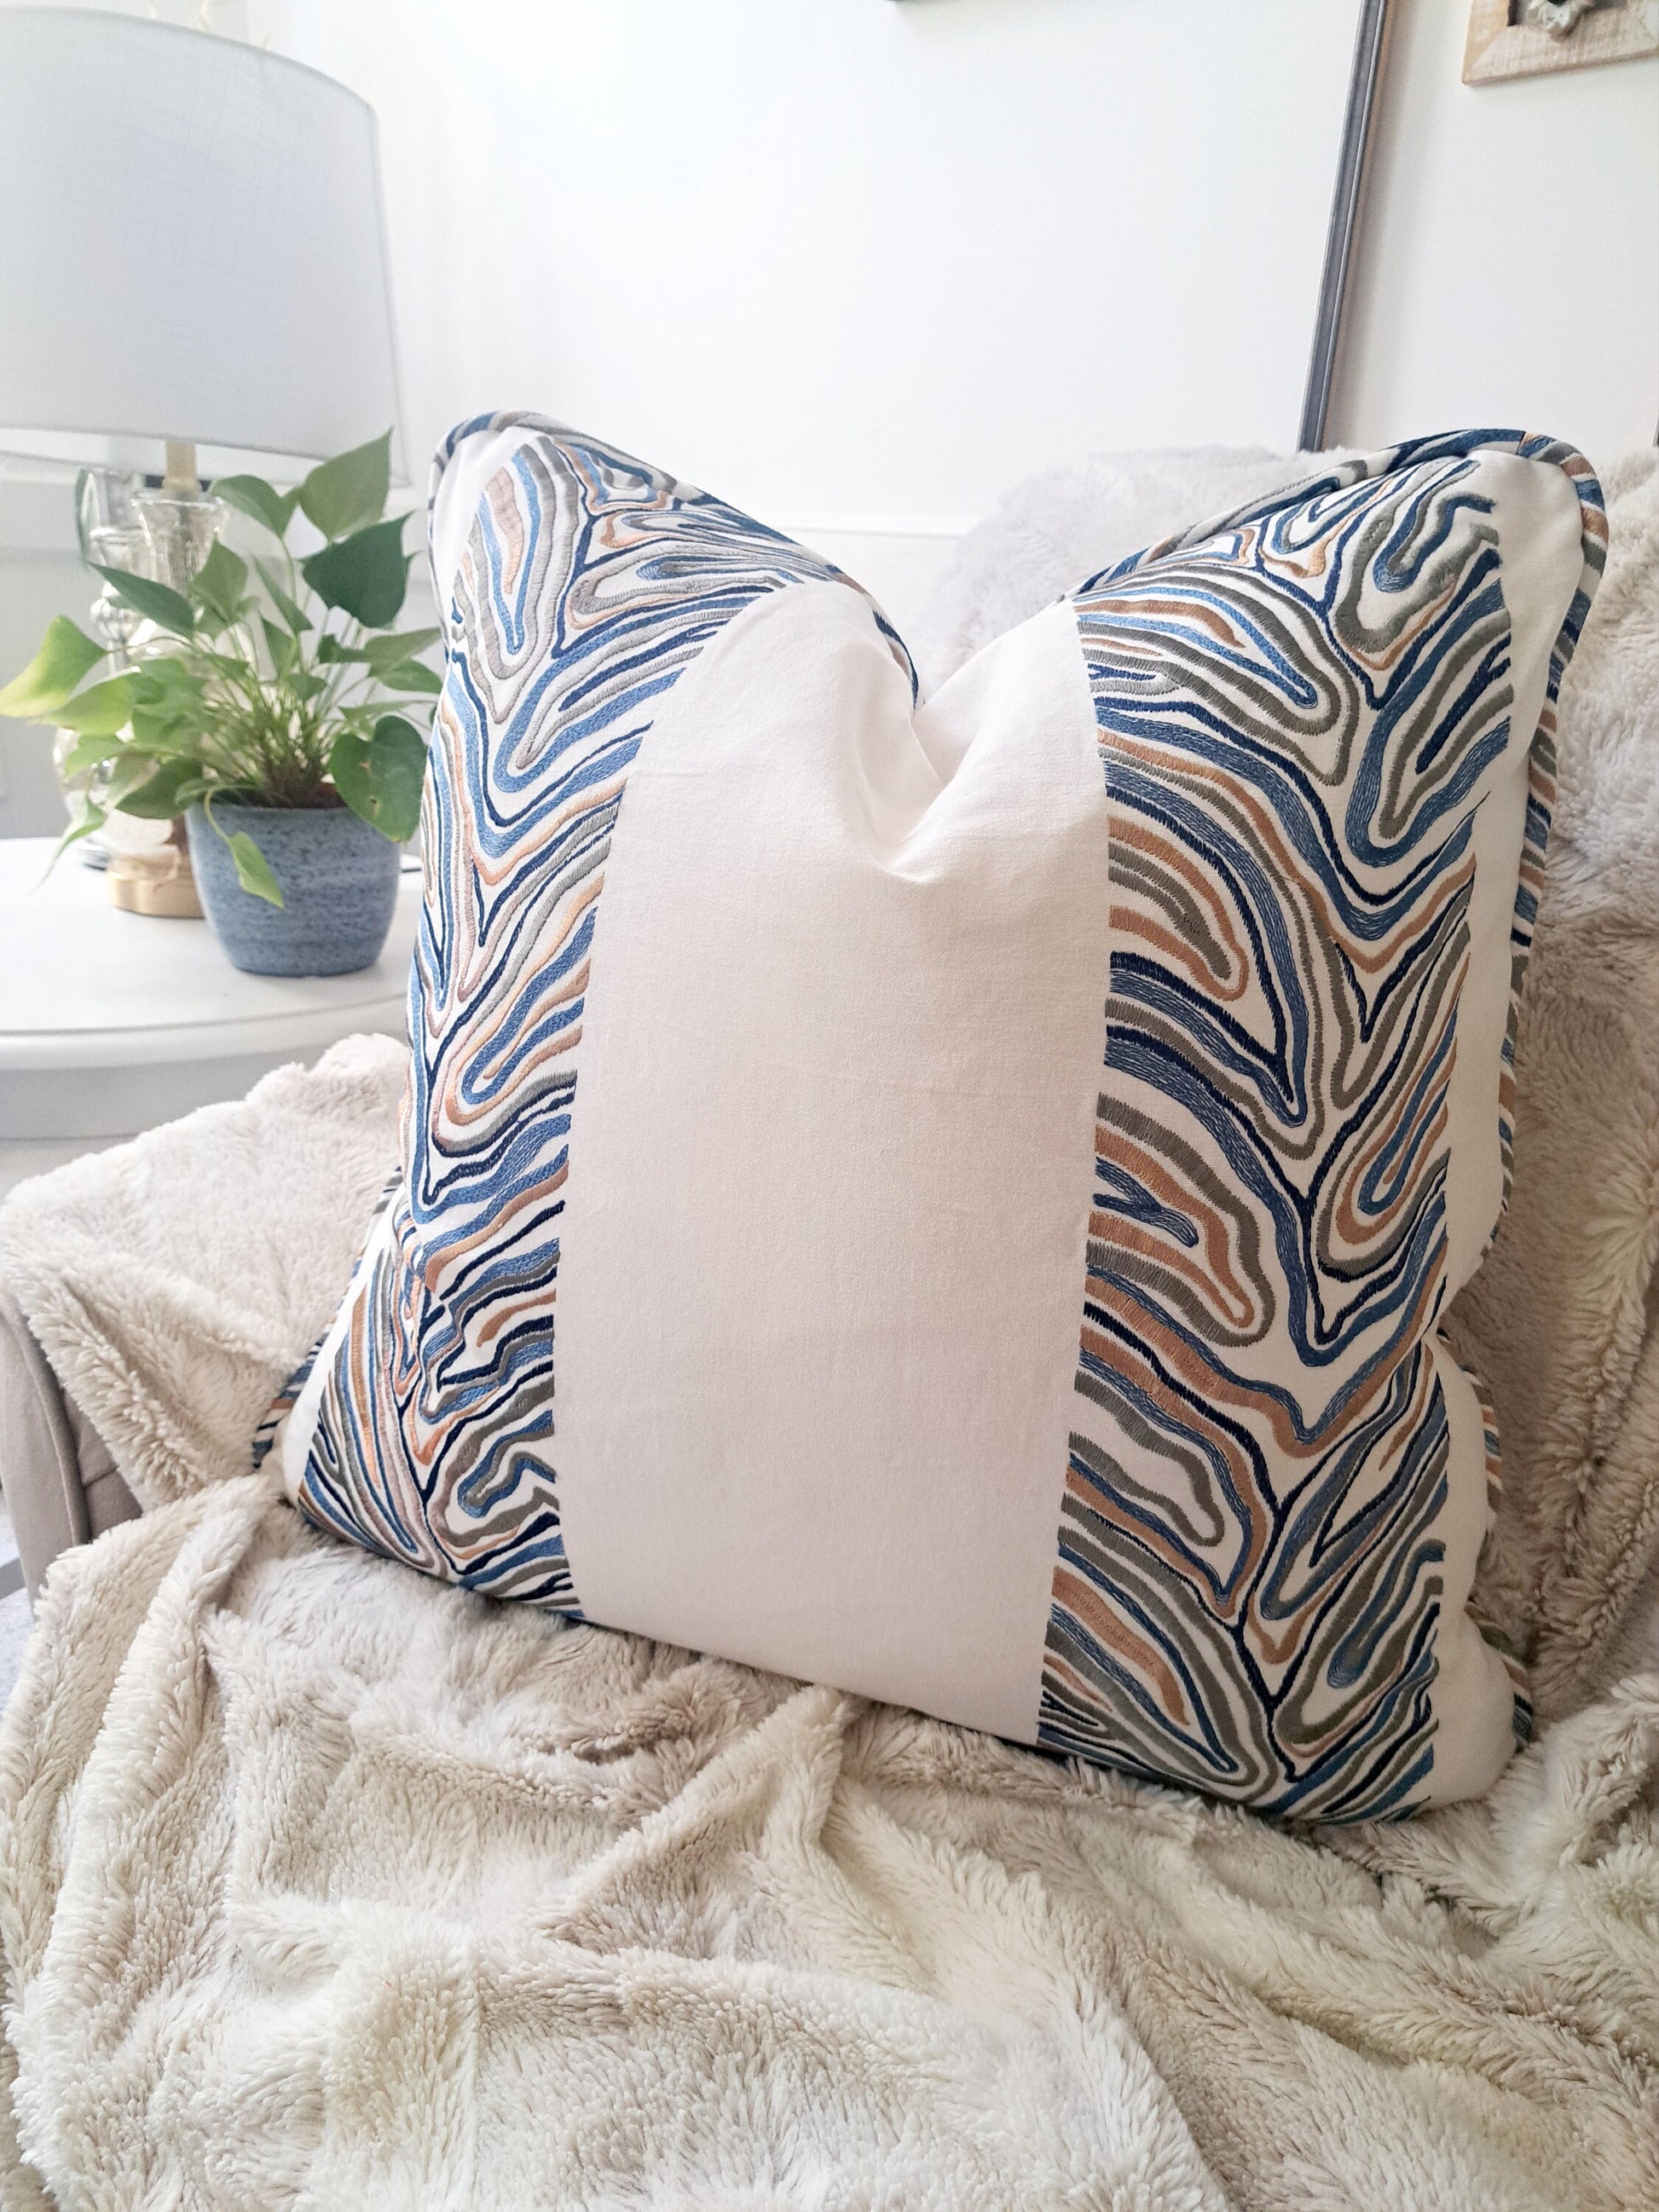 Animal Stripe Allendale Blues Pillow Cover